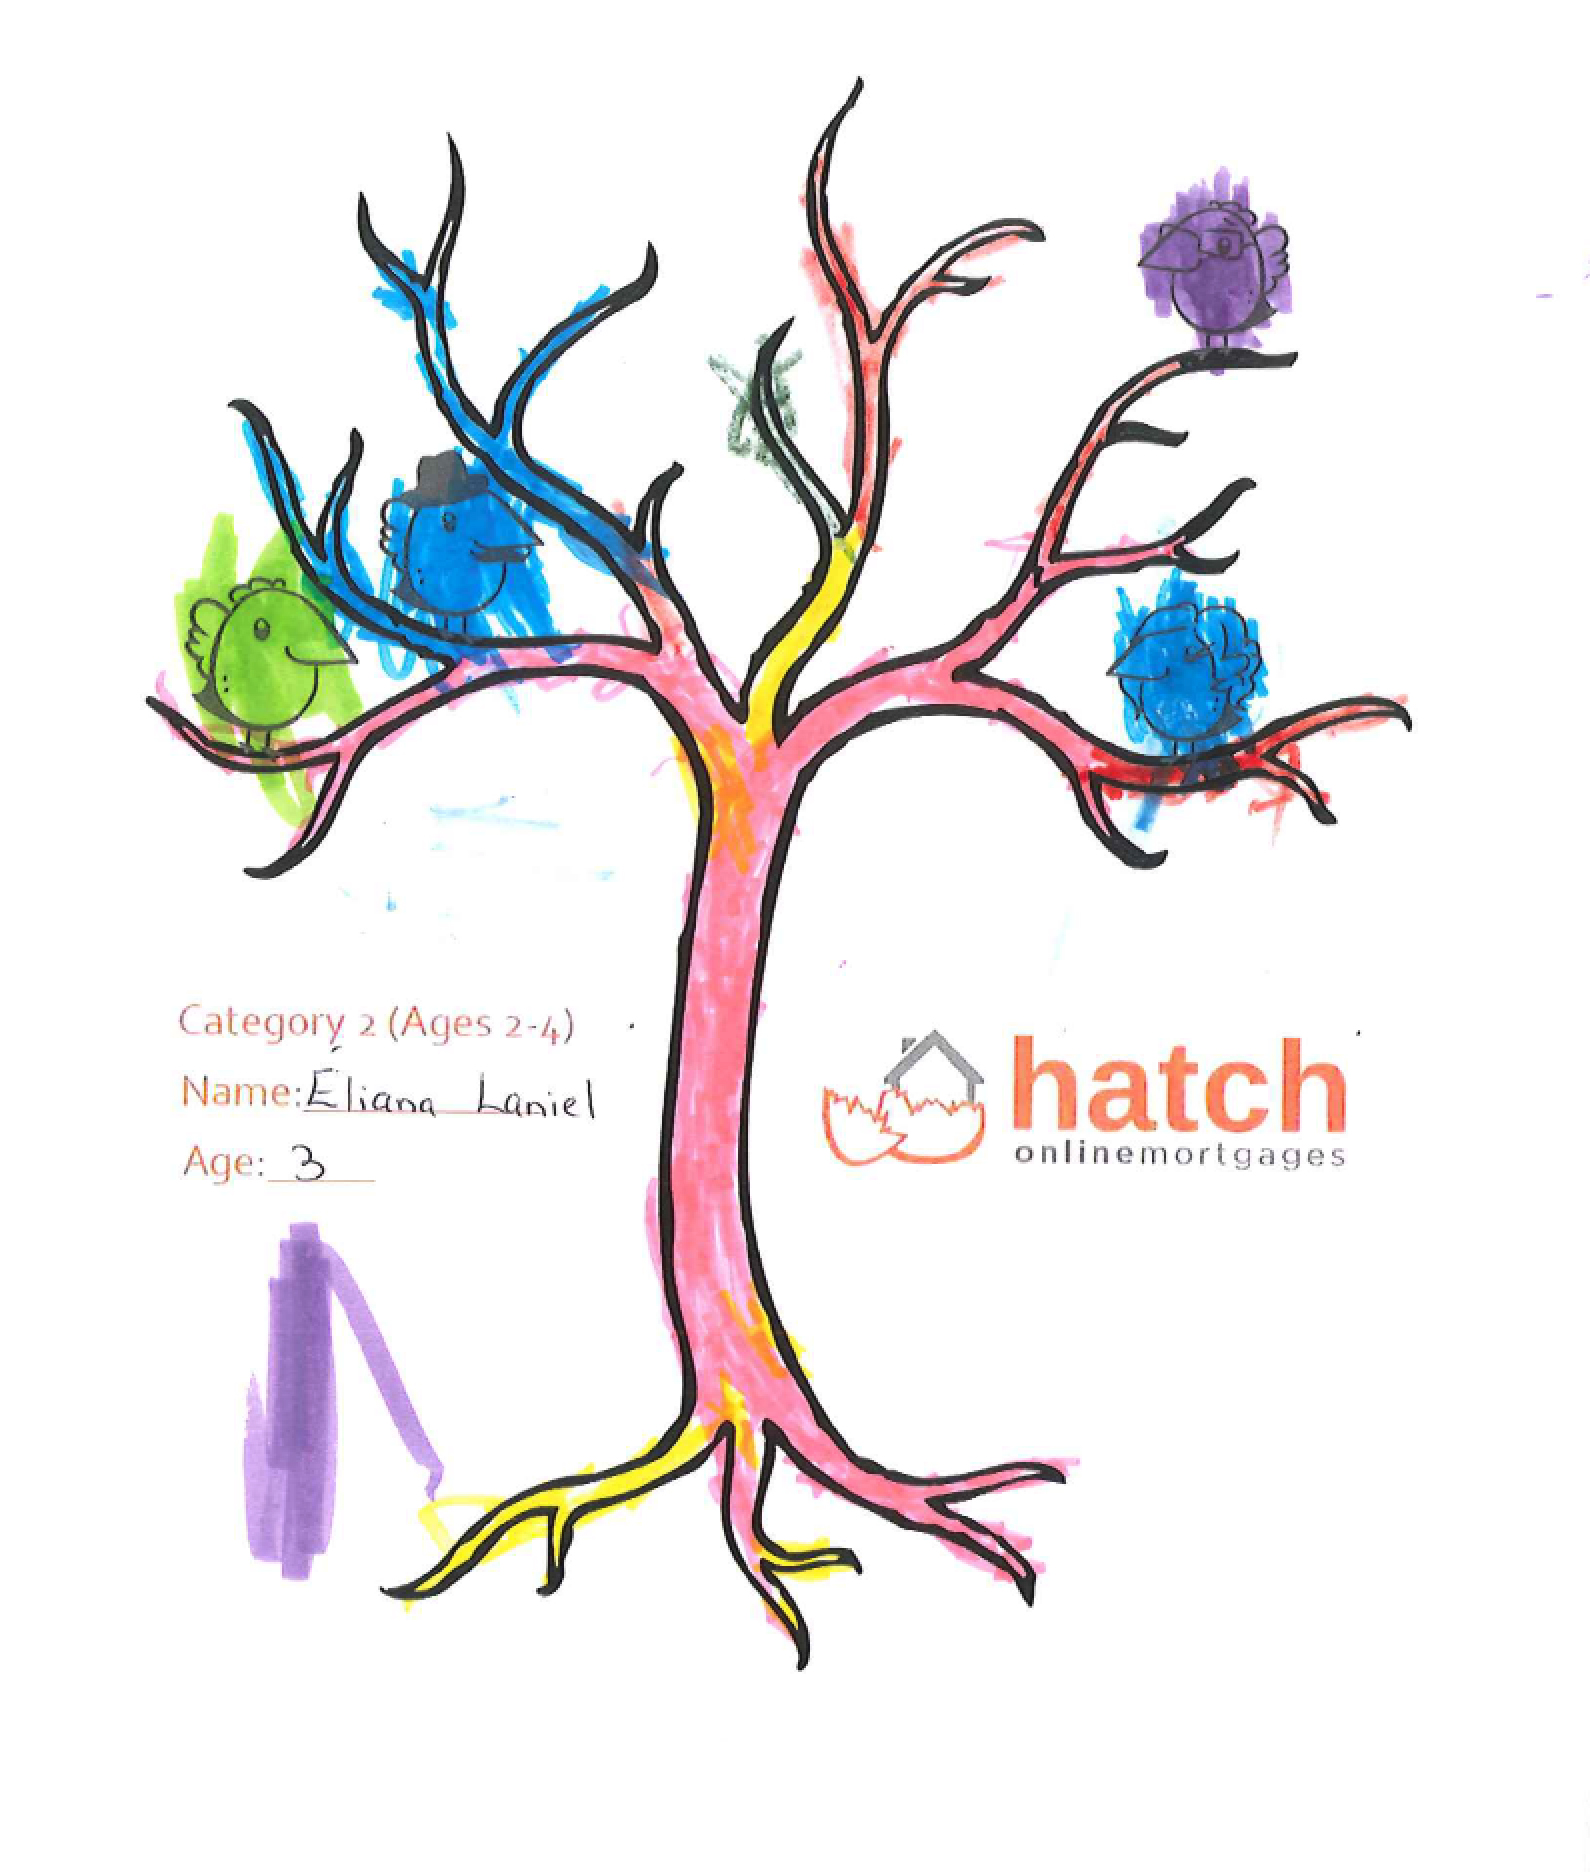 Hatch Online Mortgages Colouring Contest Age 3